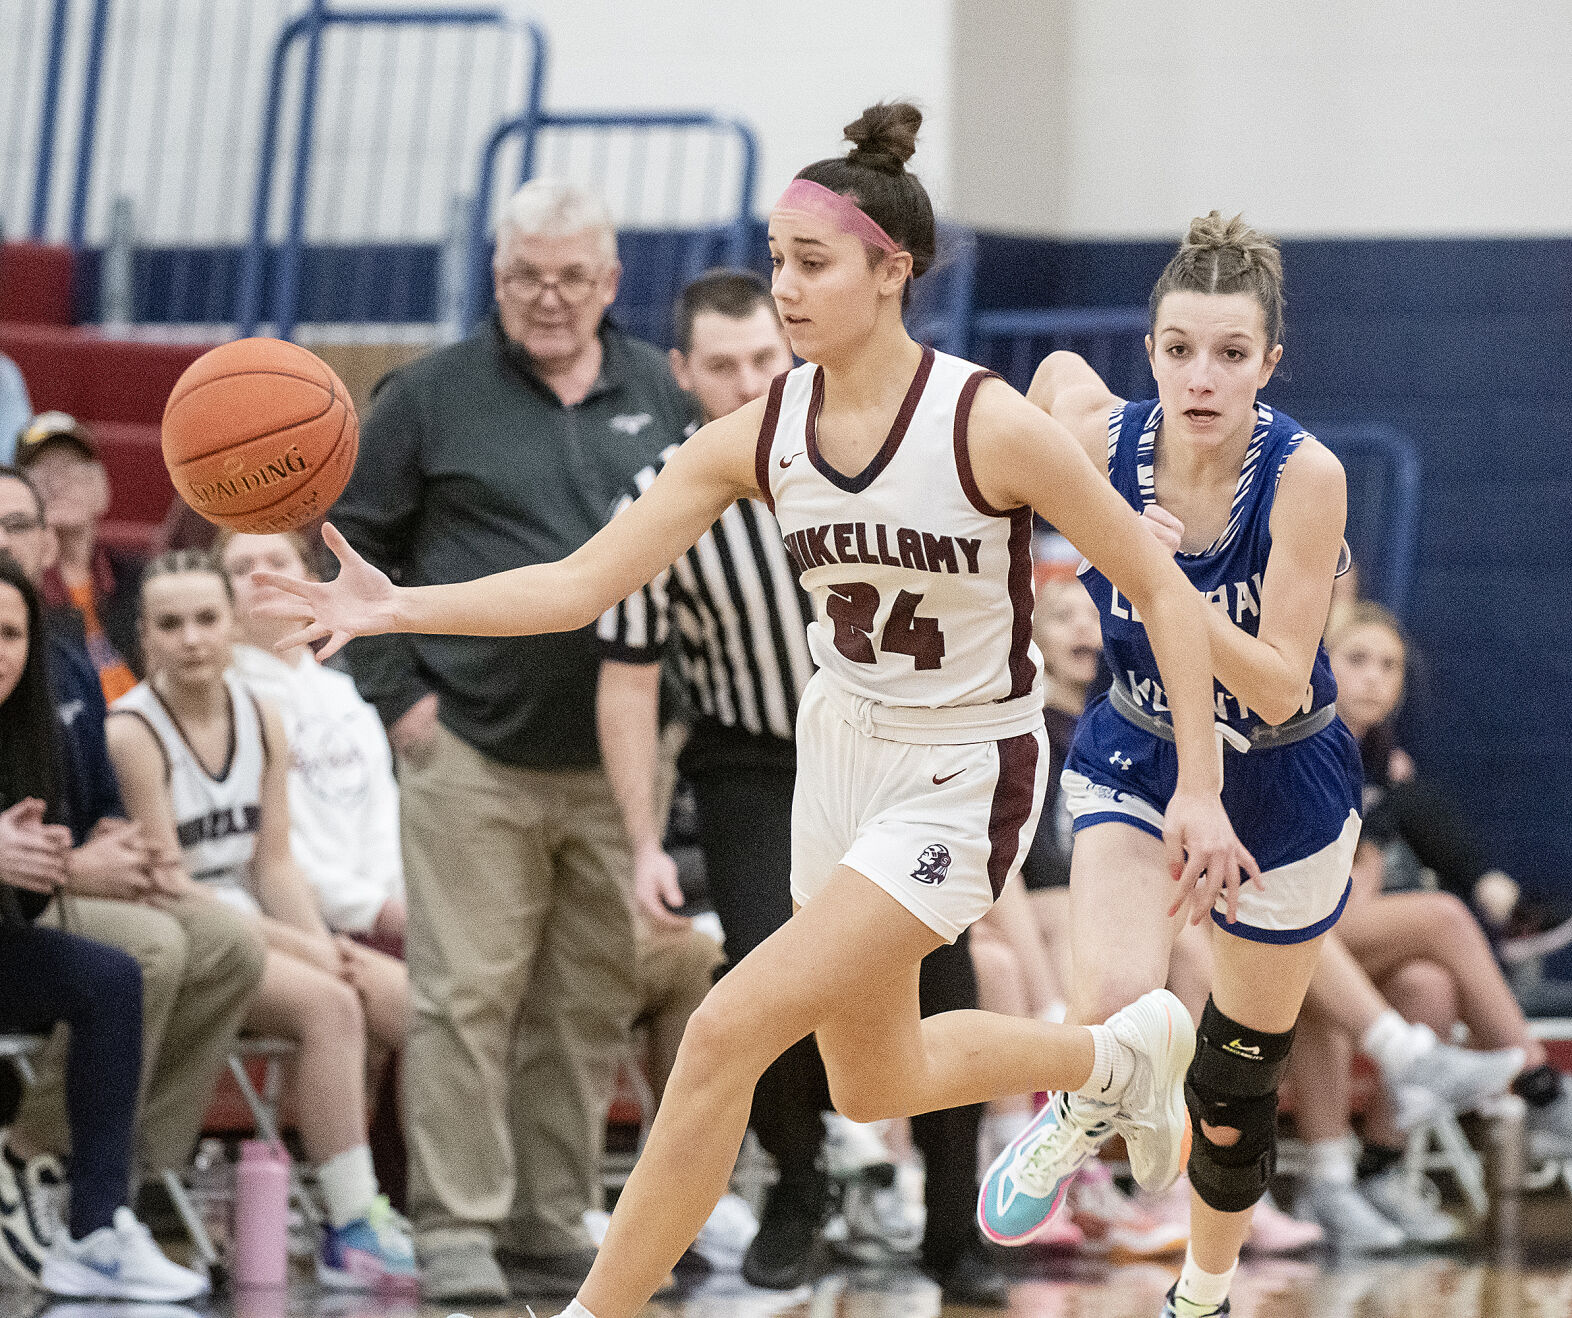 Lily Fatool impresses with career-high 38 points in Shikellamy’s dominant win